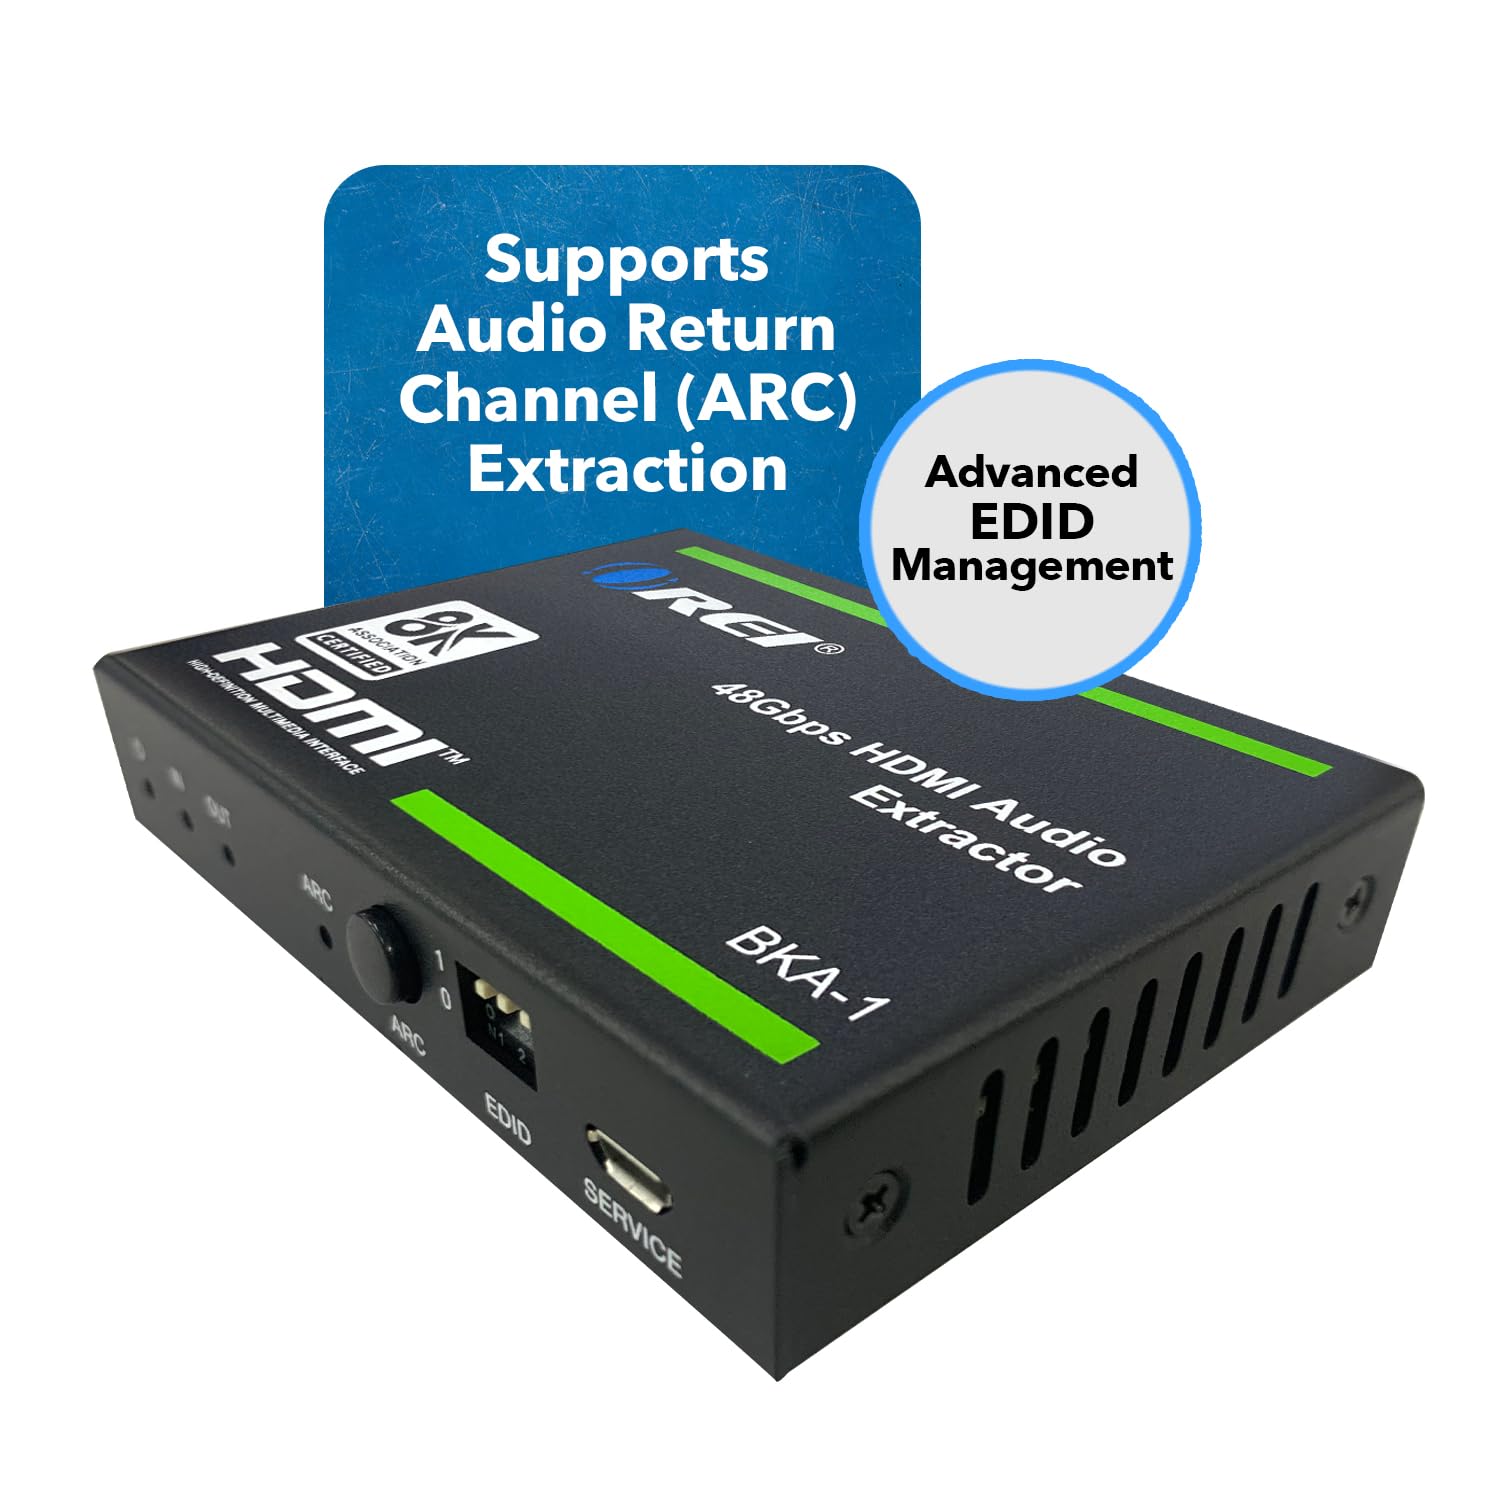 OREI 8K Audio Extractor HDMI UltraHD 4K @ 120Hz 48G HDMI 2.1 Audio Converter for PS5 SPDIF + 3.5mm Output HDCP 2.3 - Dolby Digital/DTS Passthrough CEC, HDR, Dolby Vision, ARC, HDR10+ (BKA-1)